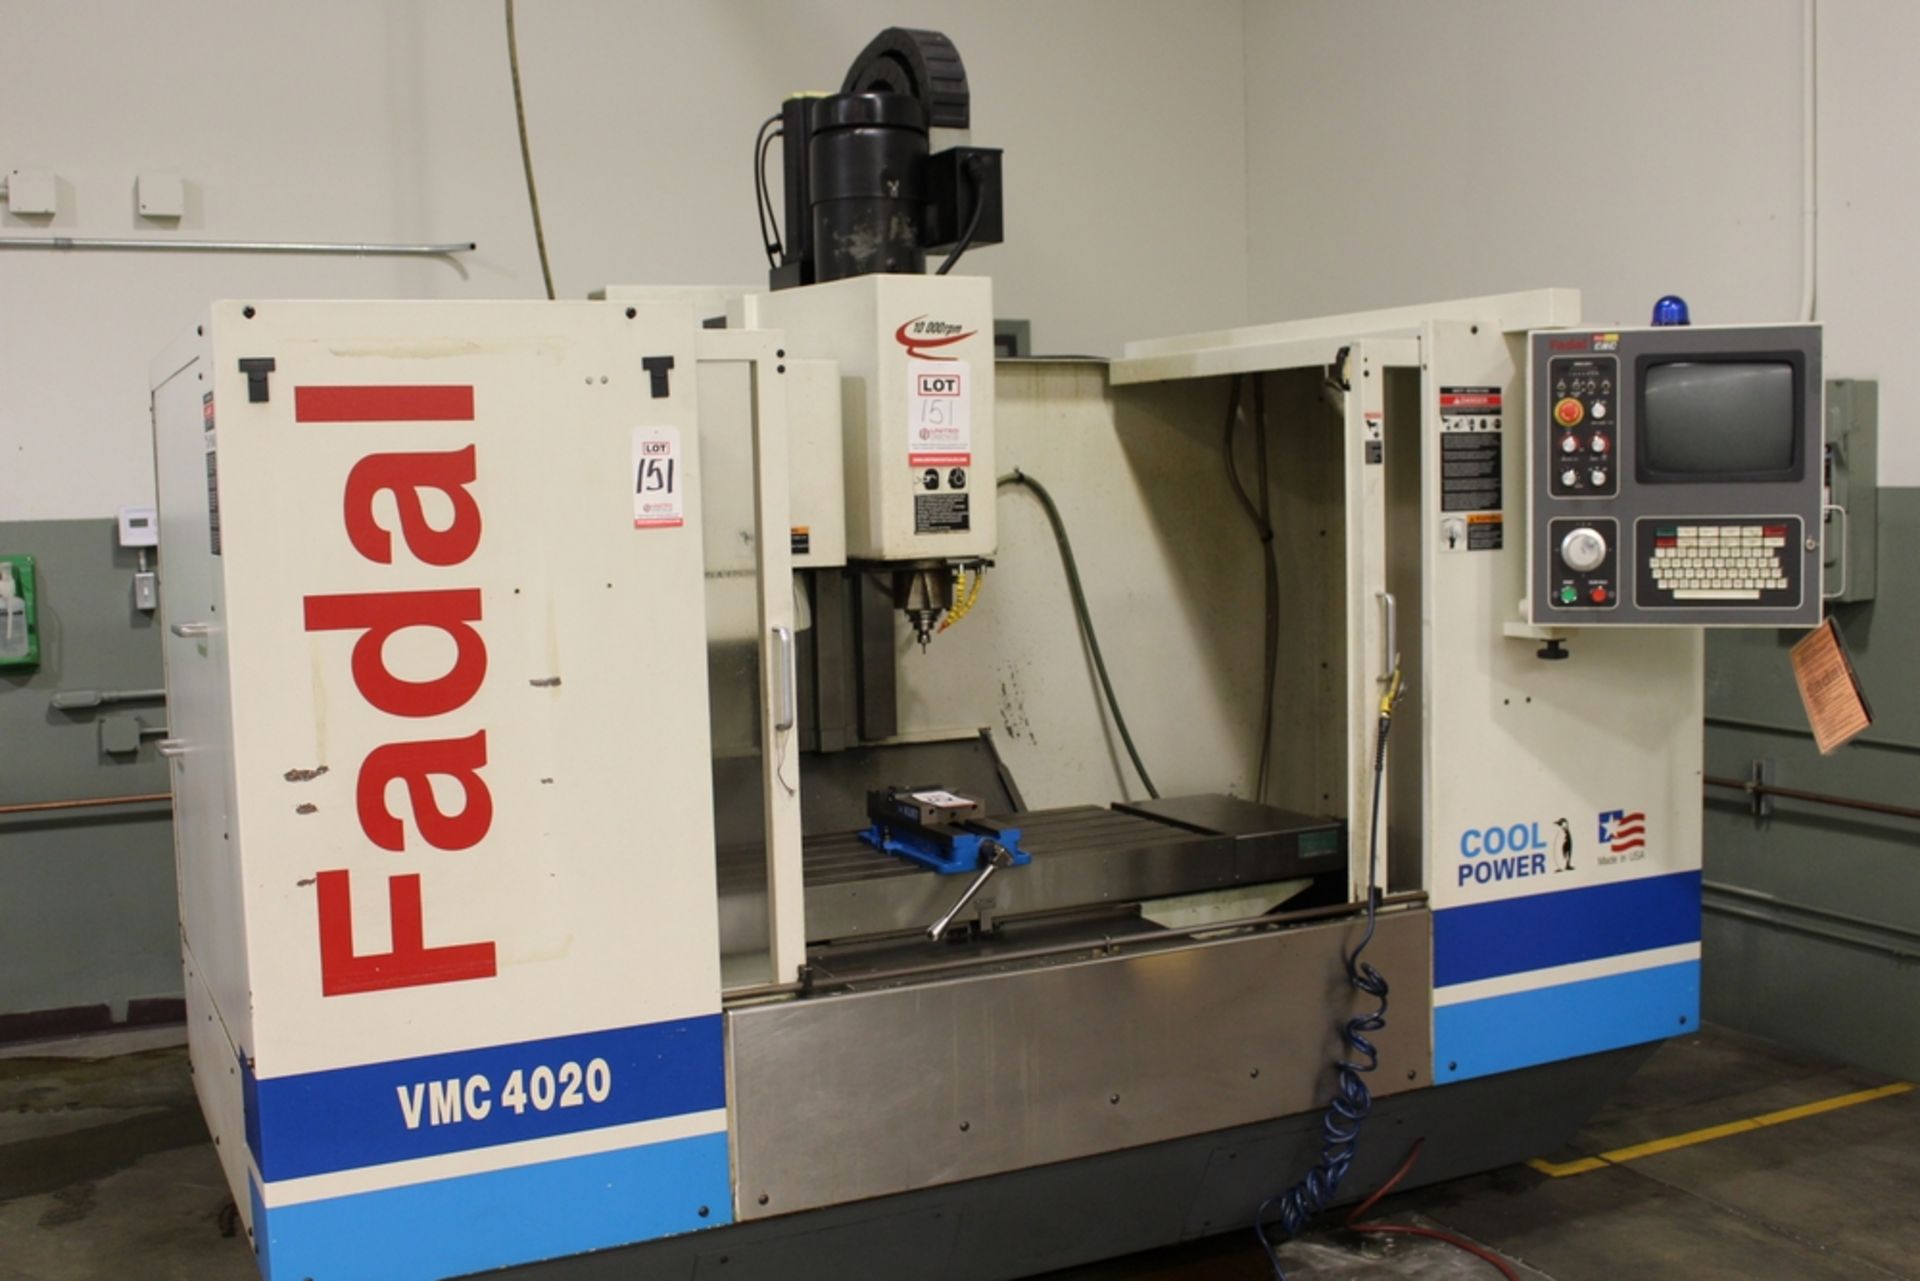 2001 FADAL MODEL 906 VERTICAL MACHINING CENTER, 4020HT, S/N 032001042337, 10,000 RPM SPINDLE, COOL